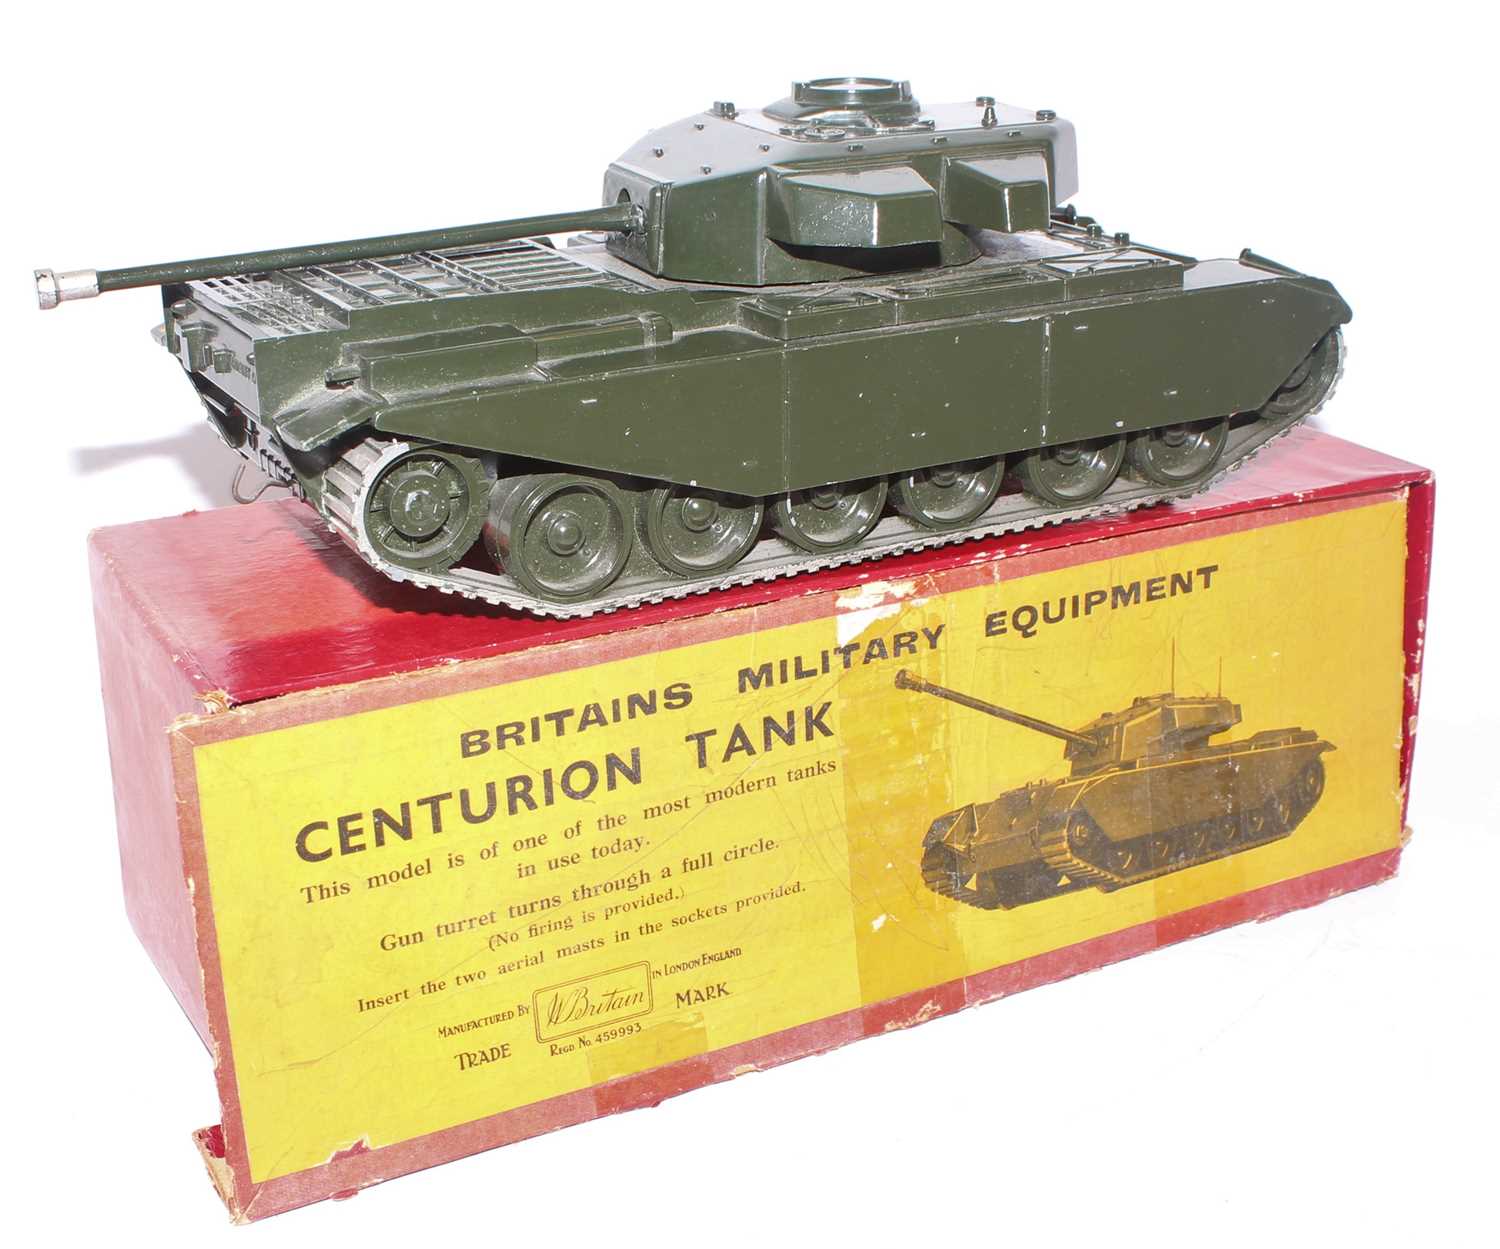 A Britains set 2150 Centurion tank comprising Centurion tank finished in dark green gloss with